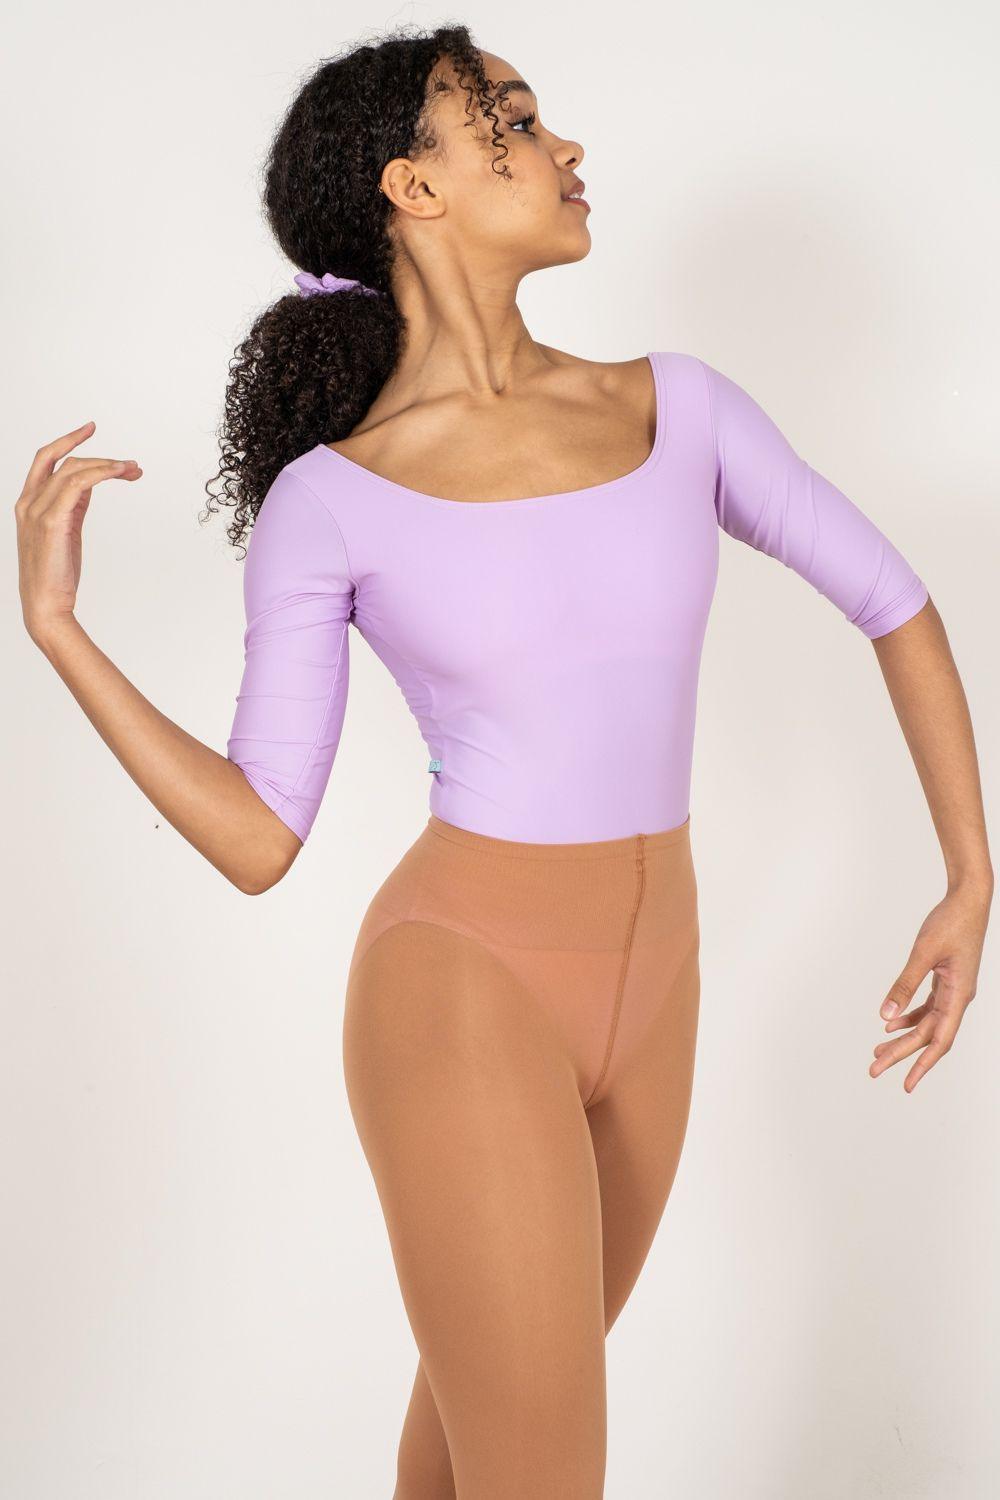 Women's Barcelona Half Sleeve Leotard - Lavender - Long Sleeve, Ready to Ship - Imperfect Pointes